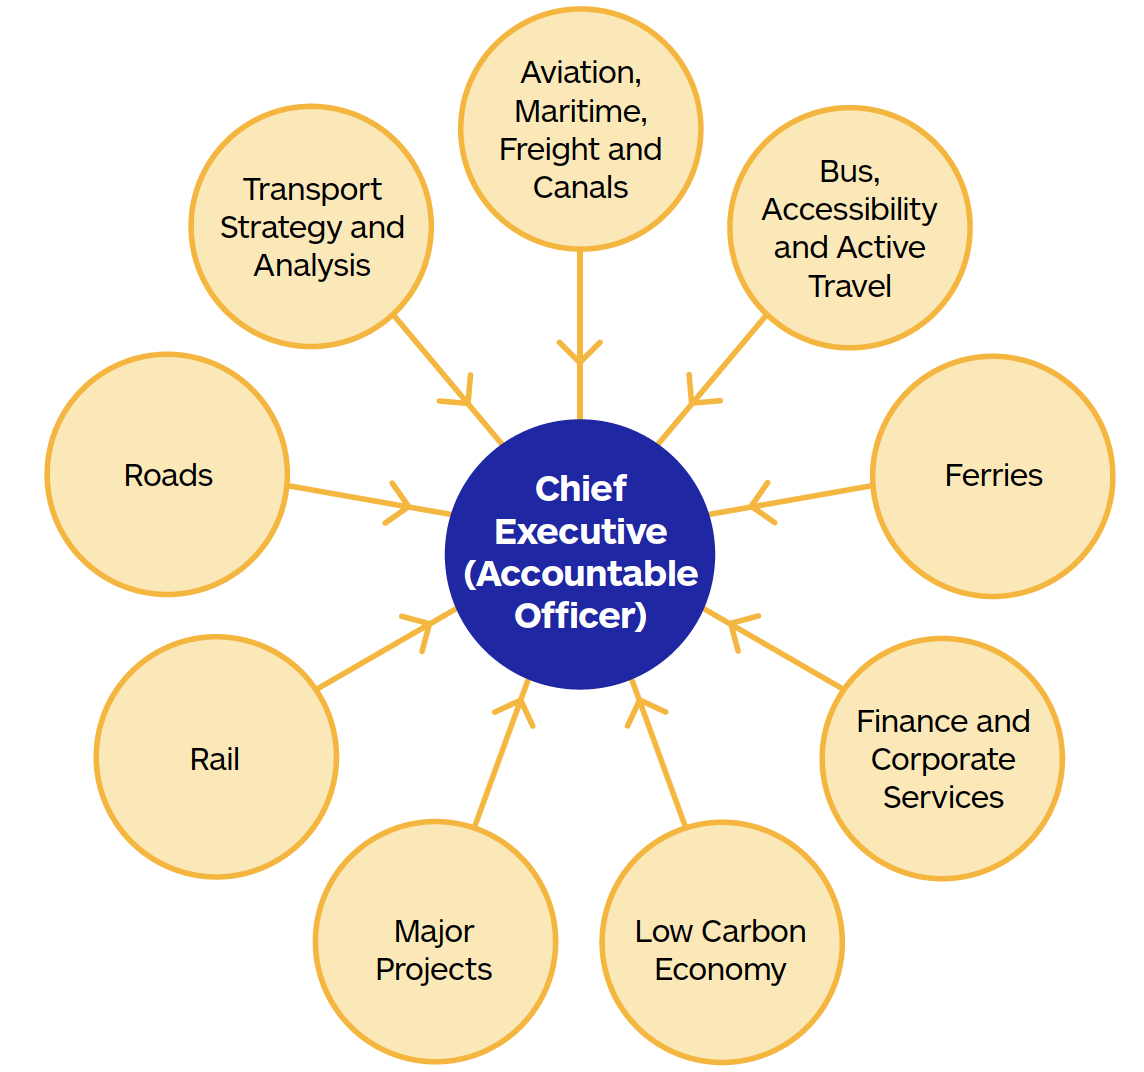 Figure 1 shows an infographic, there is a blue centre circle surrounded by 9 yellow circles. Each circle is connected to the centre circle by a line. The centre circle is marked Chief Executive (Accountable Officer). The surrounding circles are marked clockwise from the top, Aviation, Maritime, Freight and Canals; Bus, Accessibility and Active Travel; Ferries; Finance and Corporate Services; Low Carbon Economy; Major Projects; Rail; Roads; and Transport Strategy and Analysis. End of graphic.